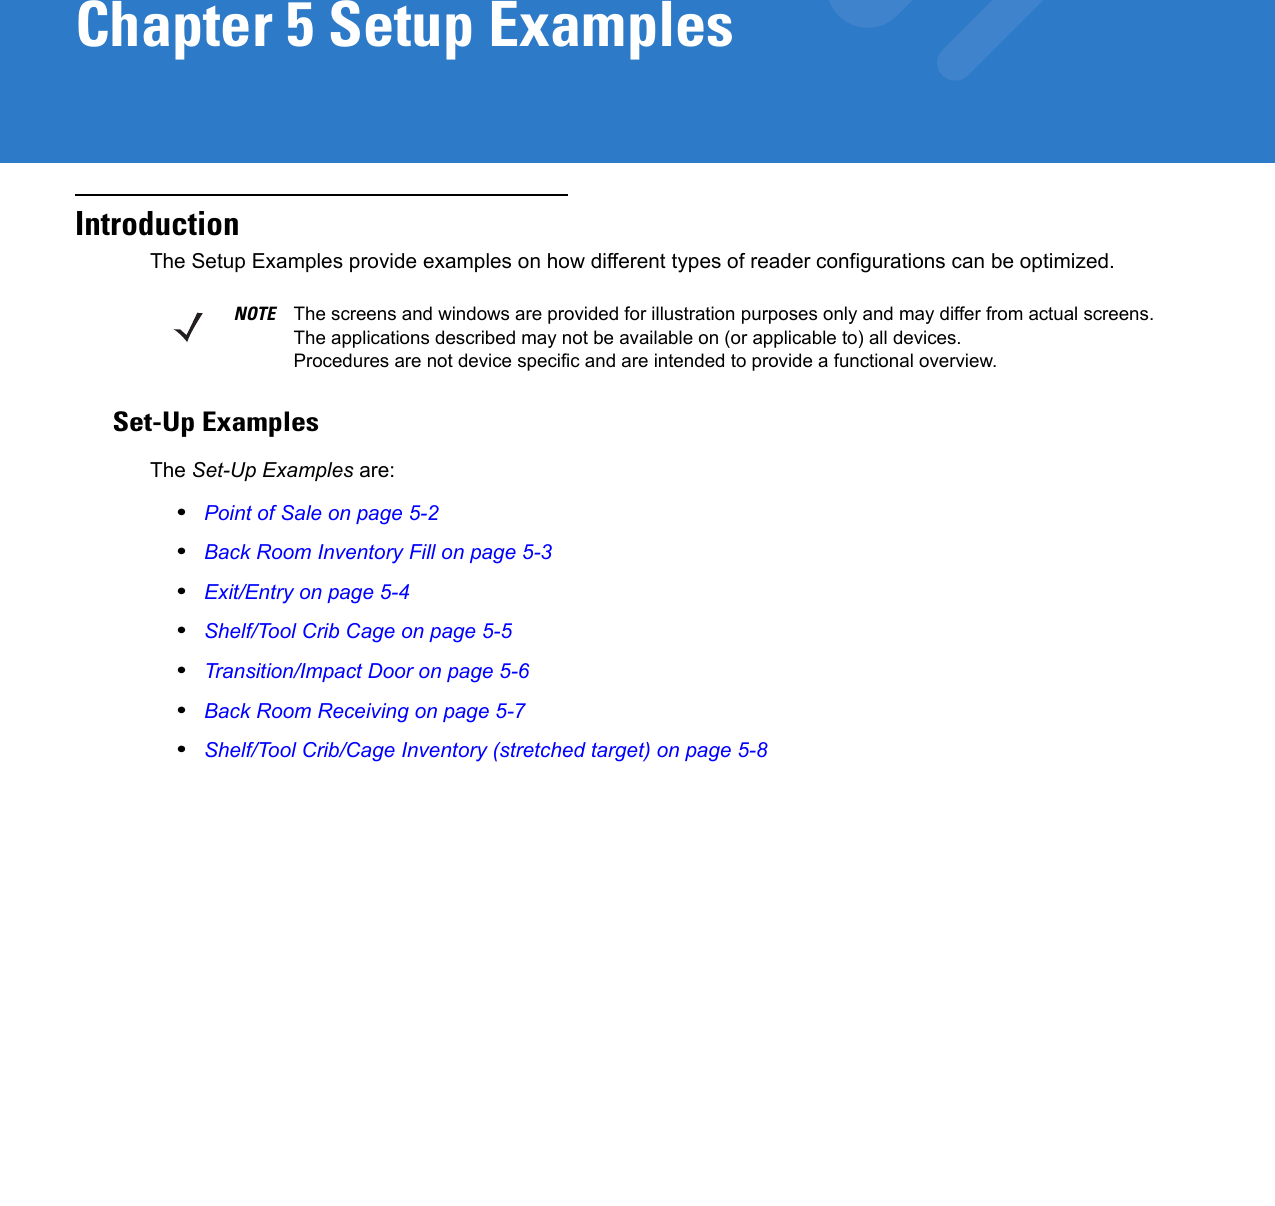 Chapter 5 Setup ExamplesIntroductionThe Setup Examples provide examples on how different types of reader configurations can be optimized. Set-Up ExamplesThe Set-Up Examples are:•Point of Sale on page 5-2•Back Room Inventory Fill on page 5-3•Exit/Entry on page 5-4•Shelf/Tool Crib Cage on page 5-5•Transition/Impact Door on page 5-6•Back Room Receiving on page 5-7•Shelf/Tool Crib/Cage Inventory (stretched target) on page 5-8NOTE The screens and windows are provided for illustration purposes only and may differ from actual screens. The applications described may not be available on (or applicable to) all devices. Procedures are not device specific and are intended to provide a functional overview.